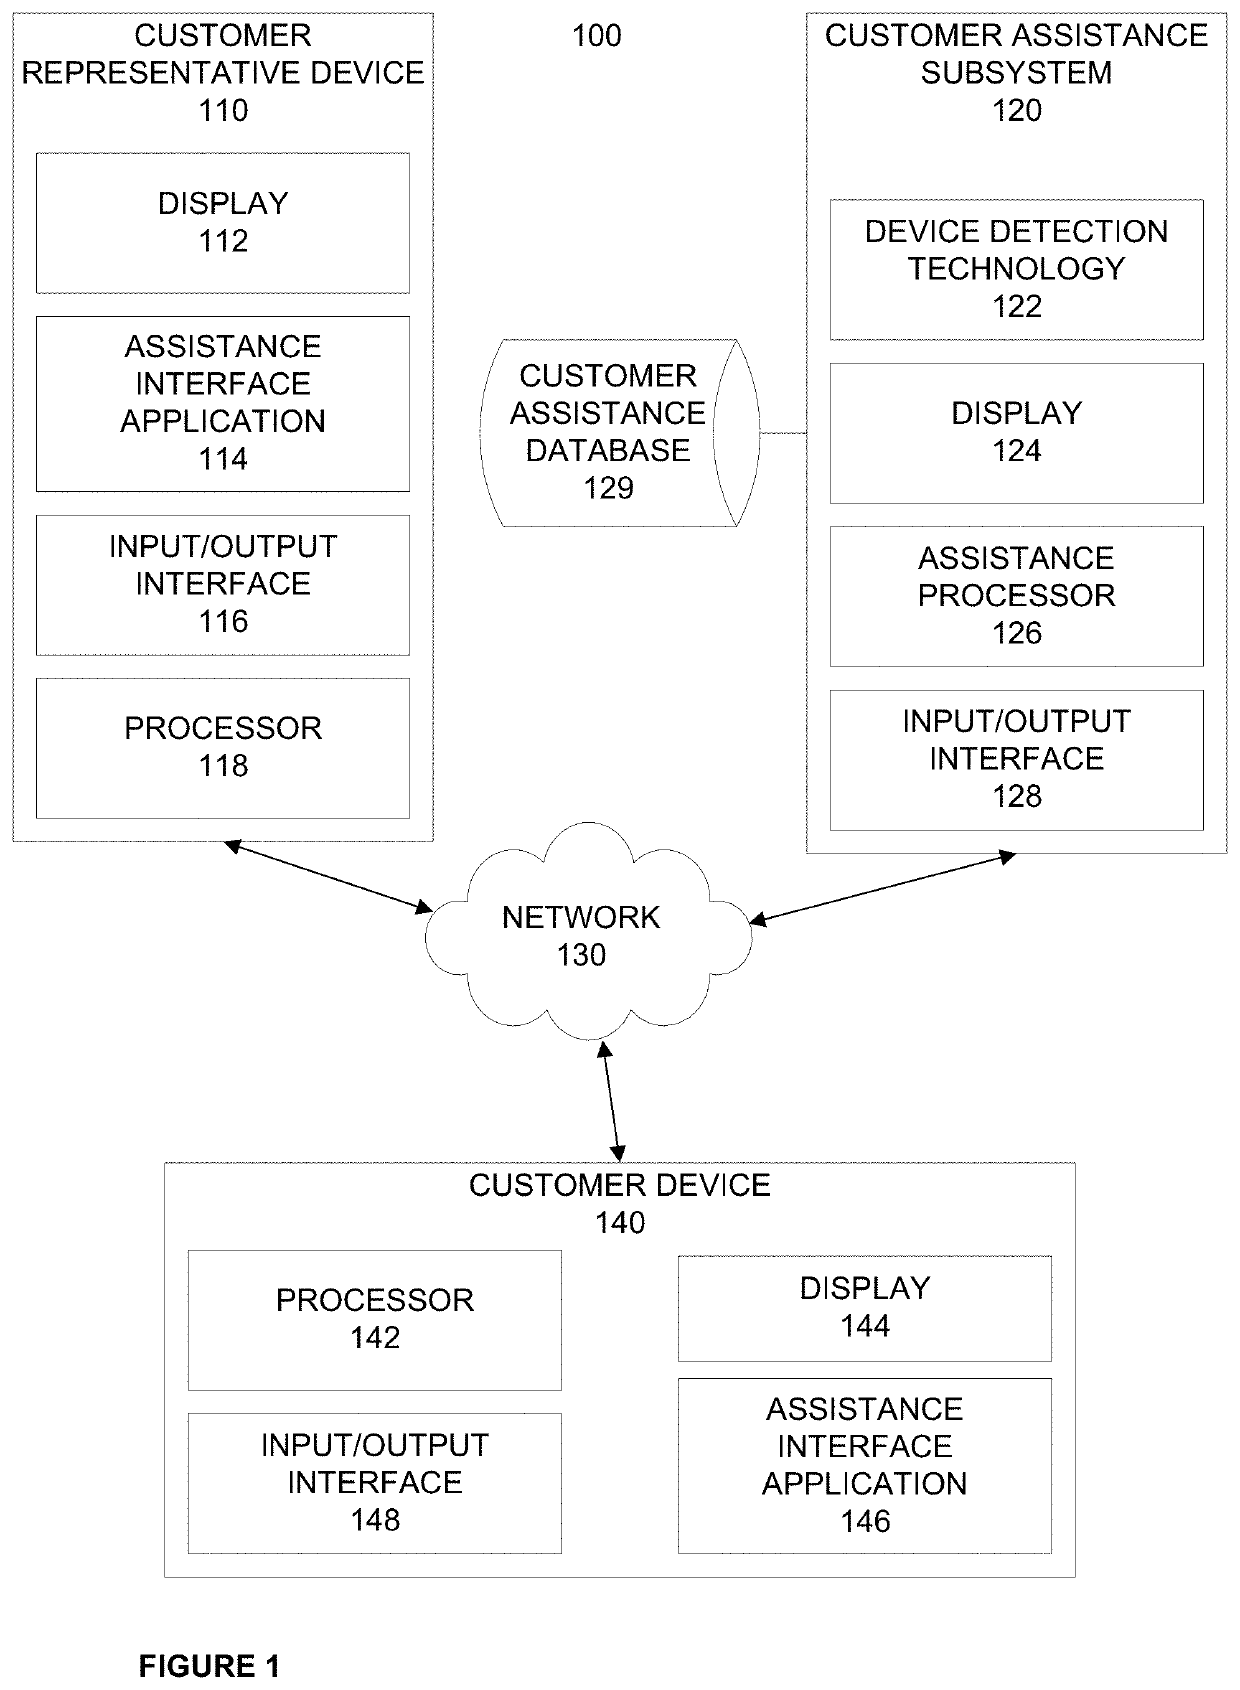 Computerized optimization of customer service queue based on customer device detection